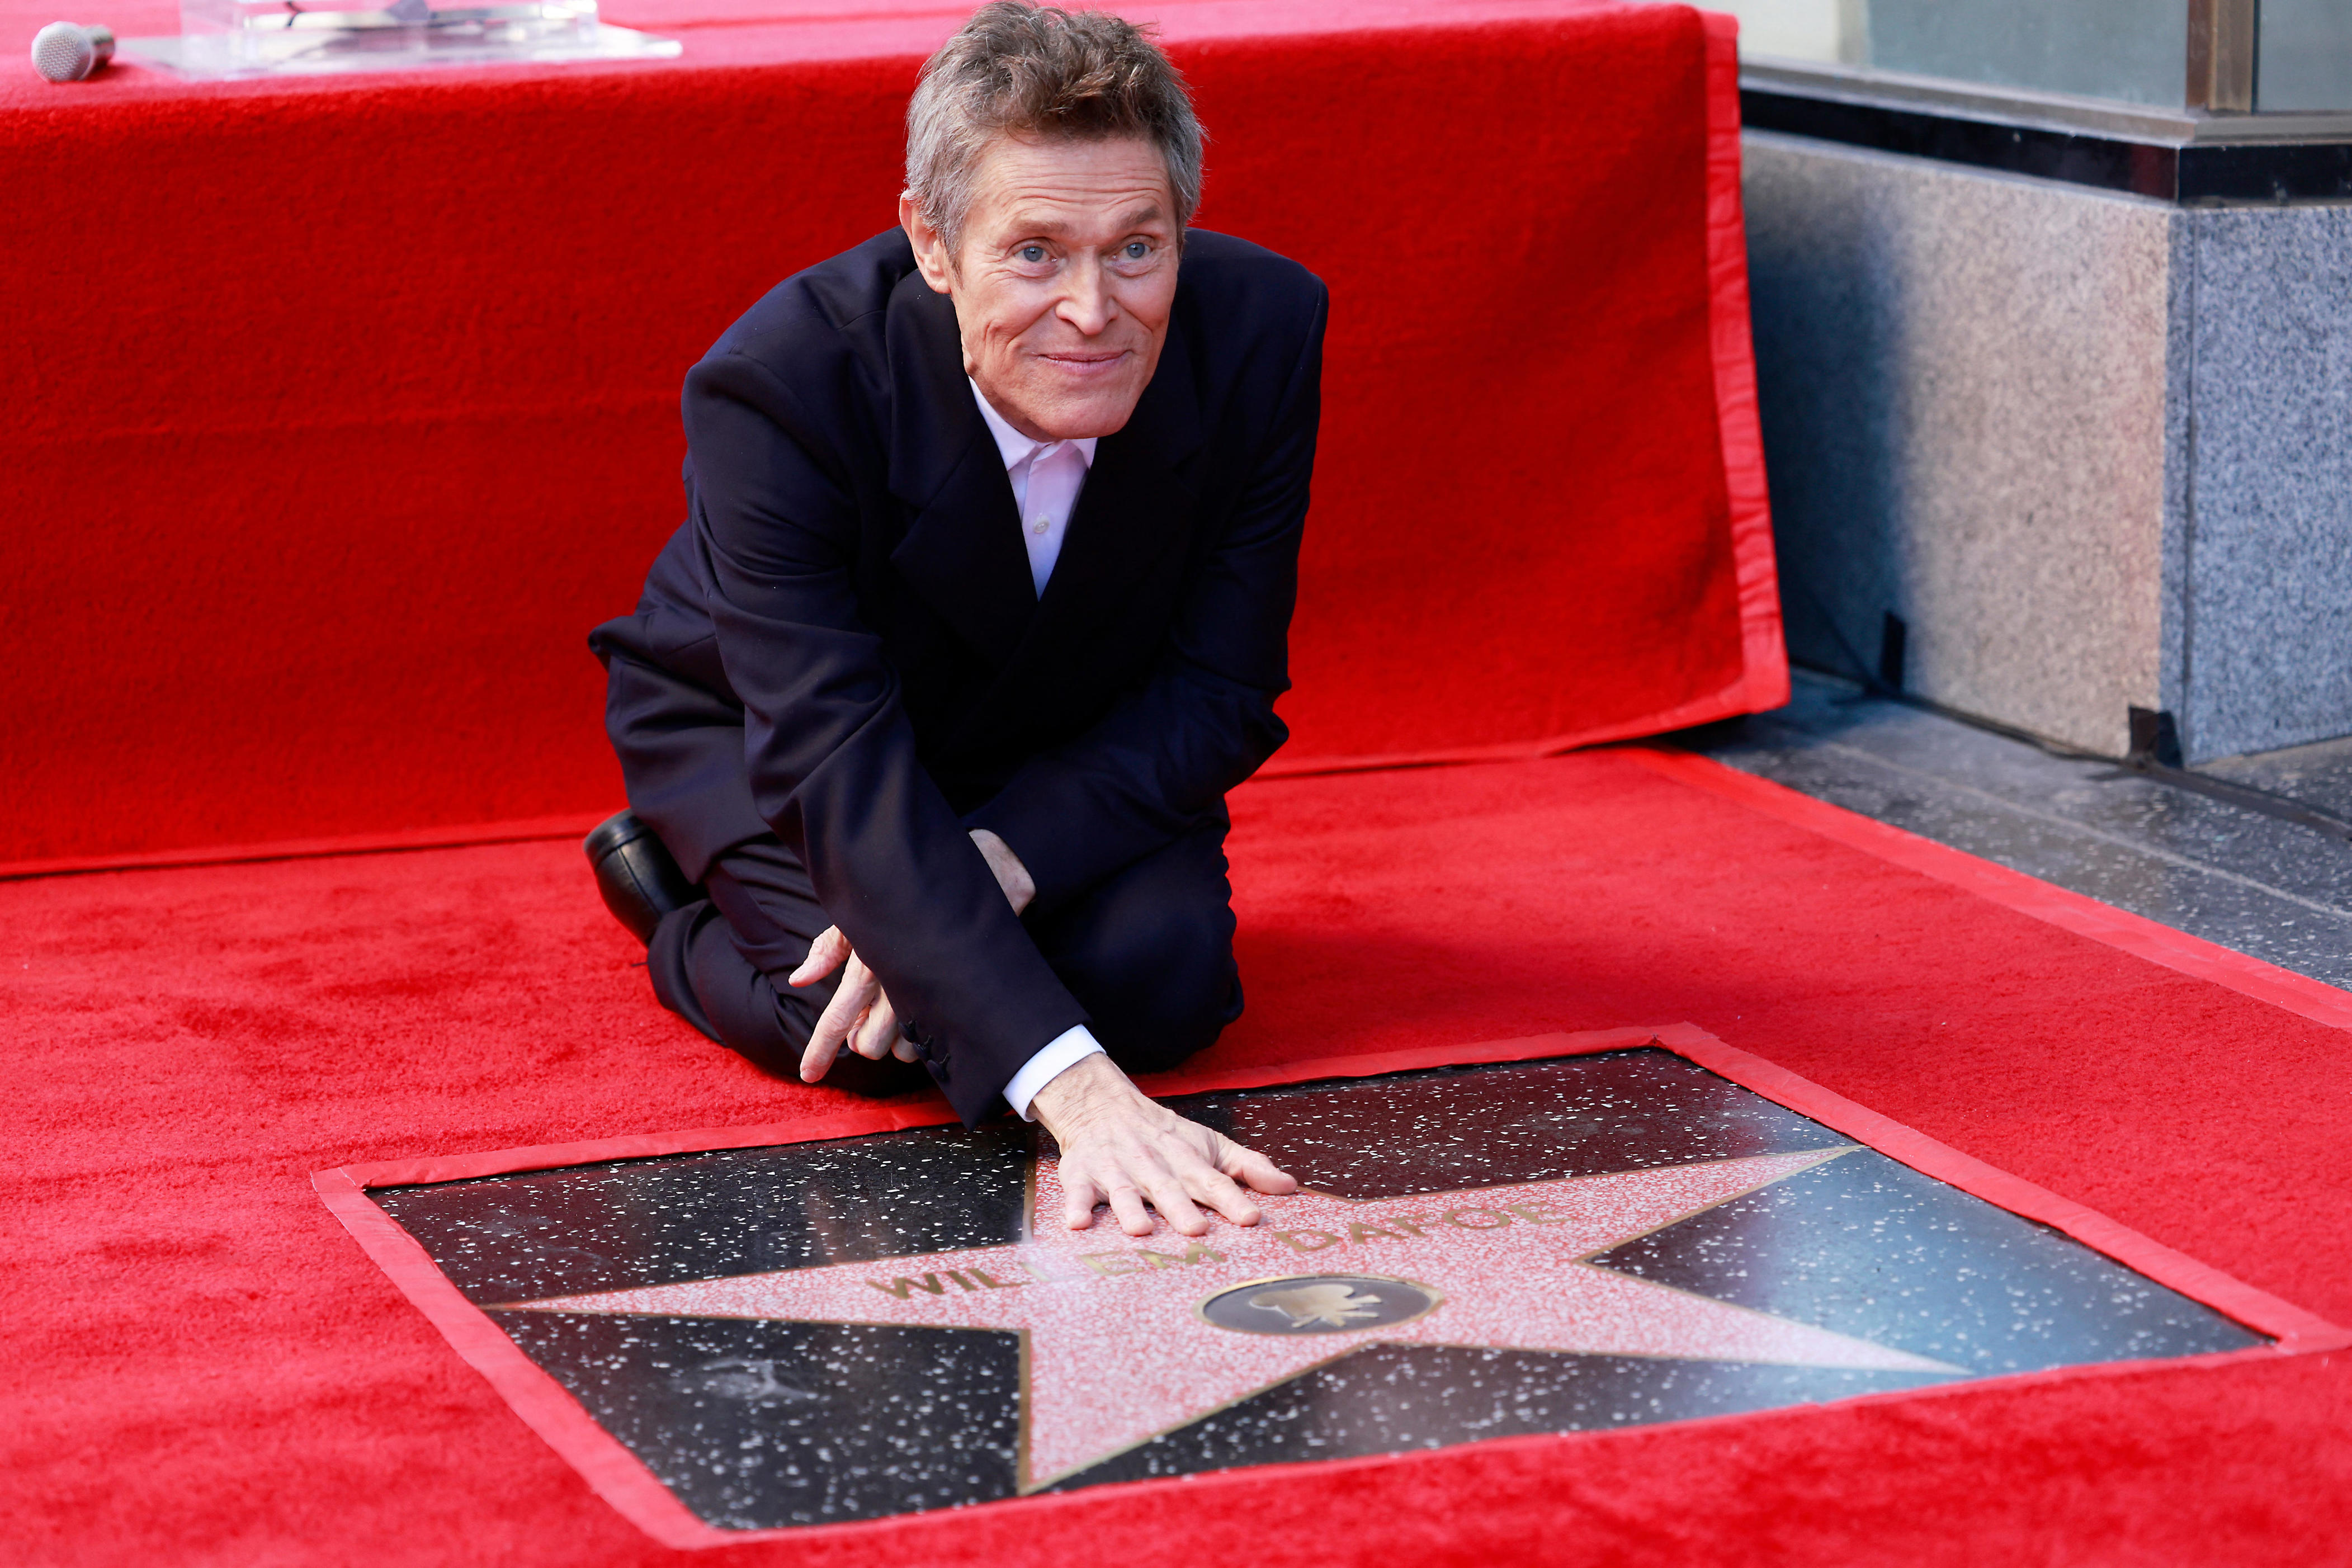 Willem Dafoe posed with his official stamp on the Hollywood Walk of Fame.